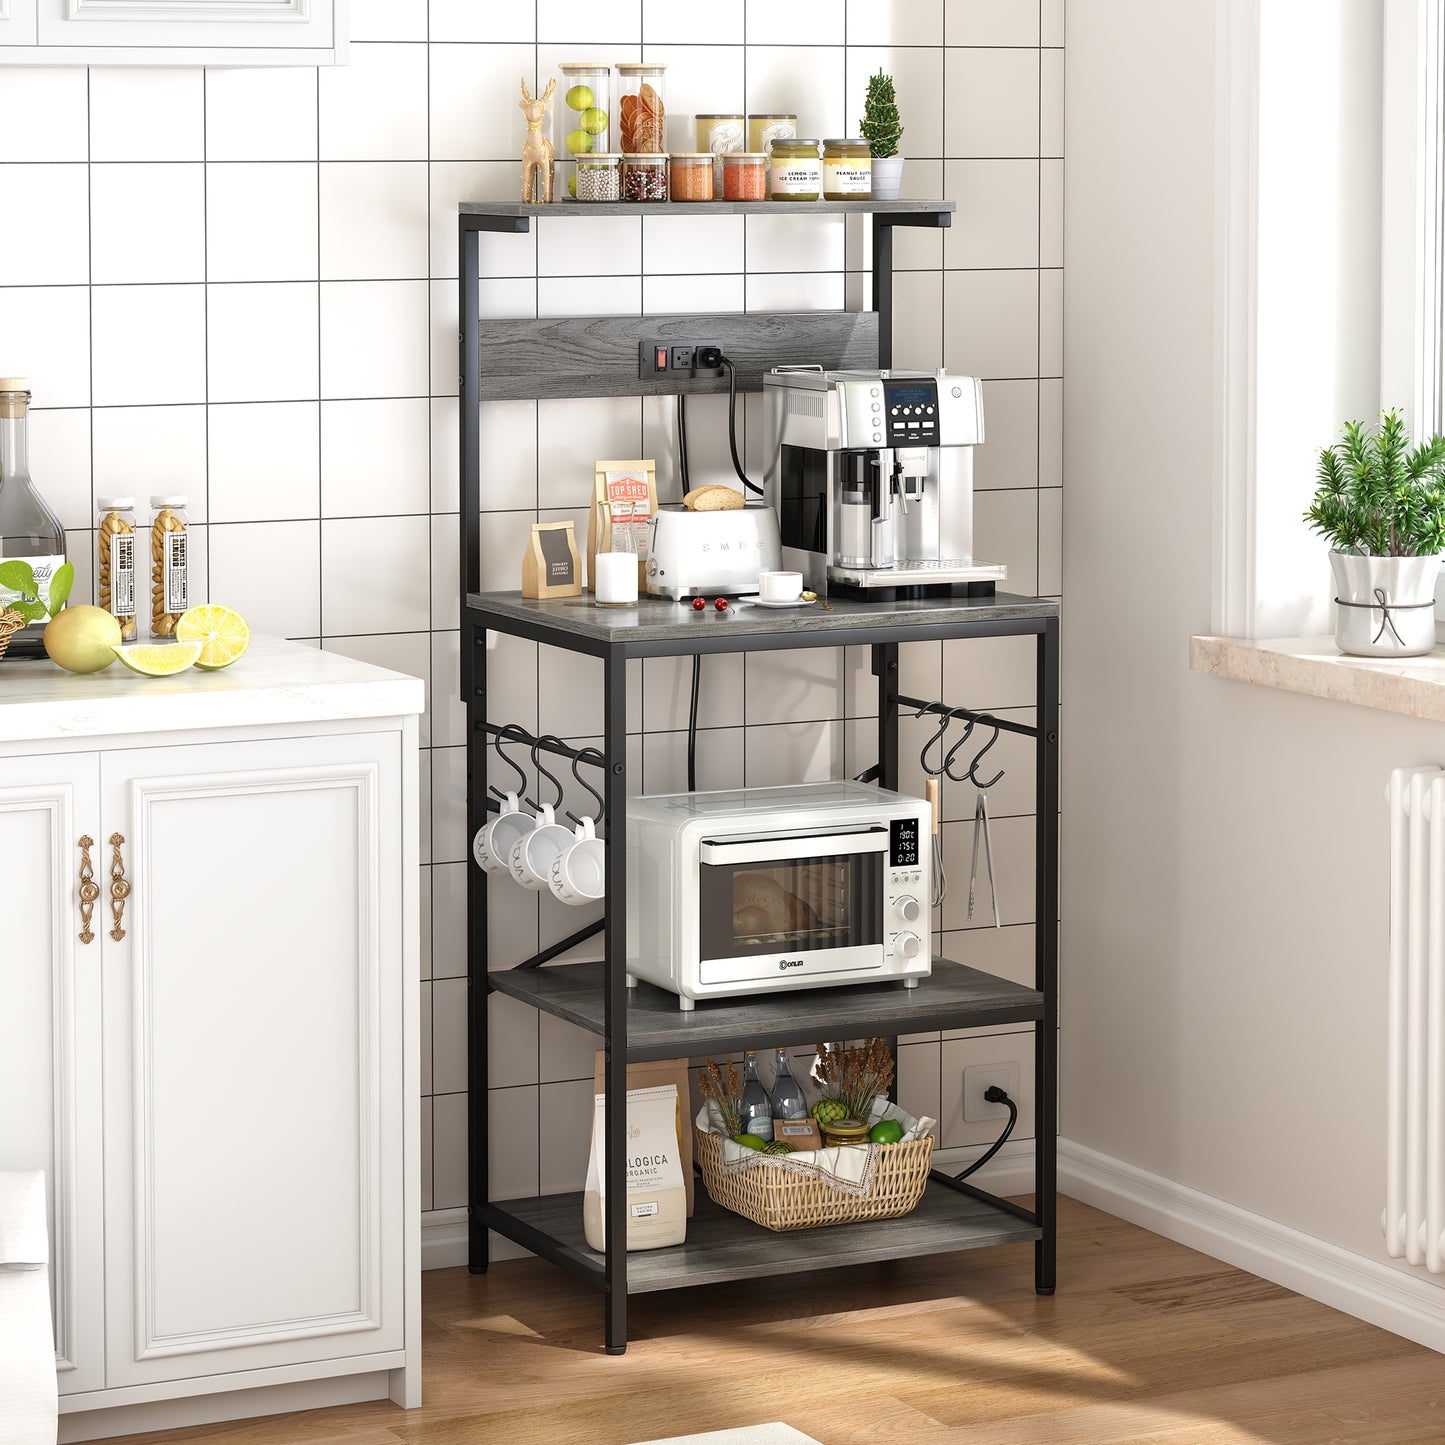 SUPERJARE Kitchen Bakers Rack with Power Outlet, Coffee Bar Table 4 Tiers, 6 S-shaped Hooks, Kitchen Storage Shelf Rack, Gray